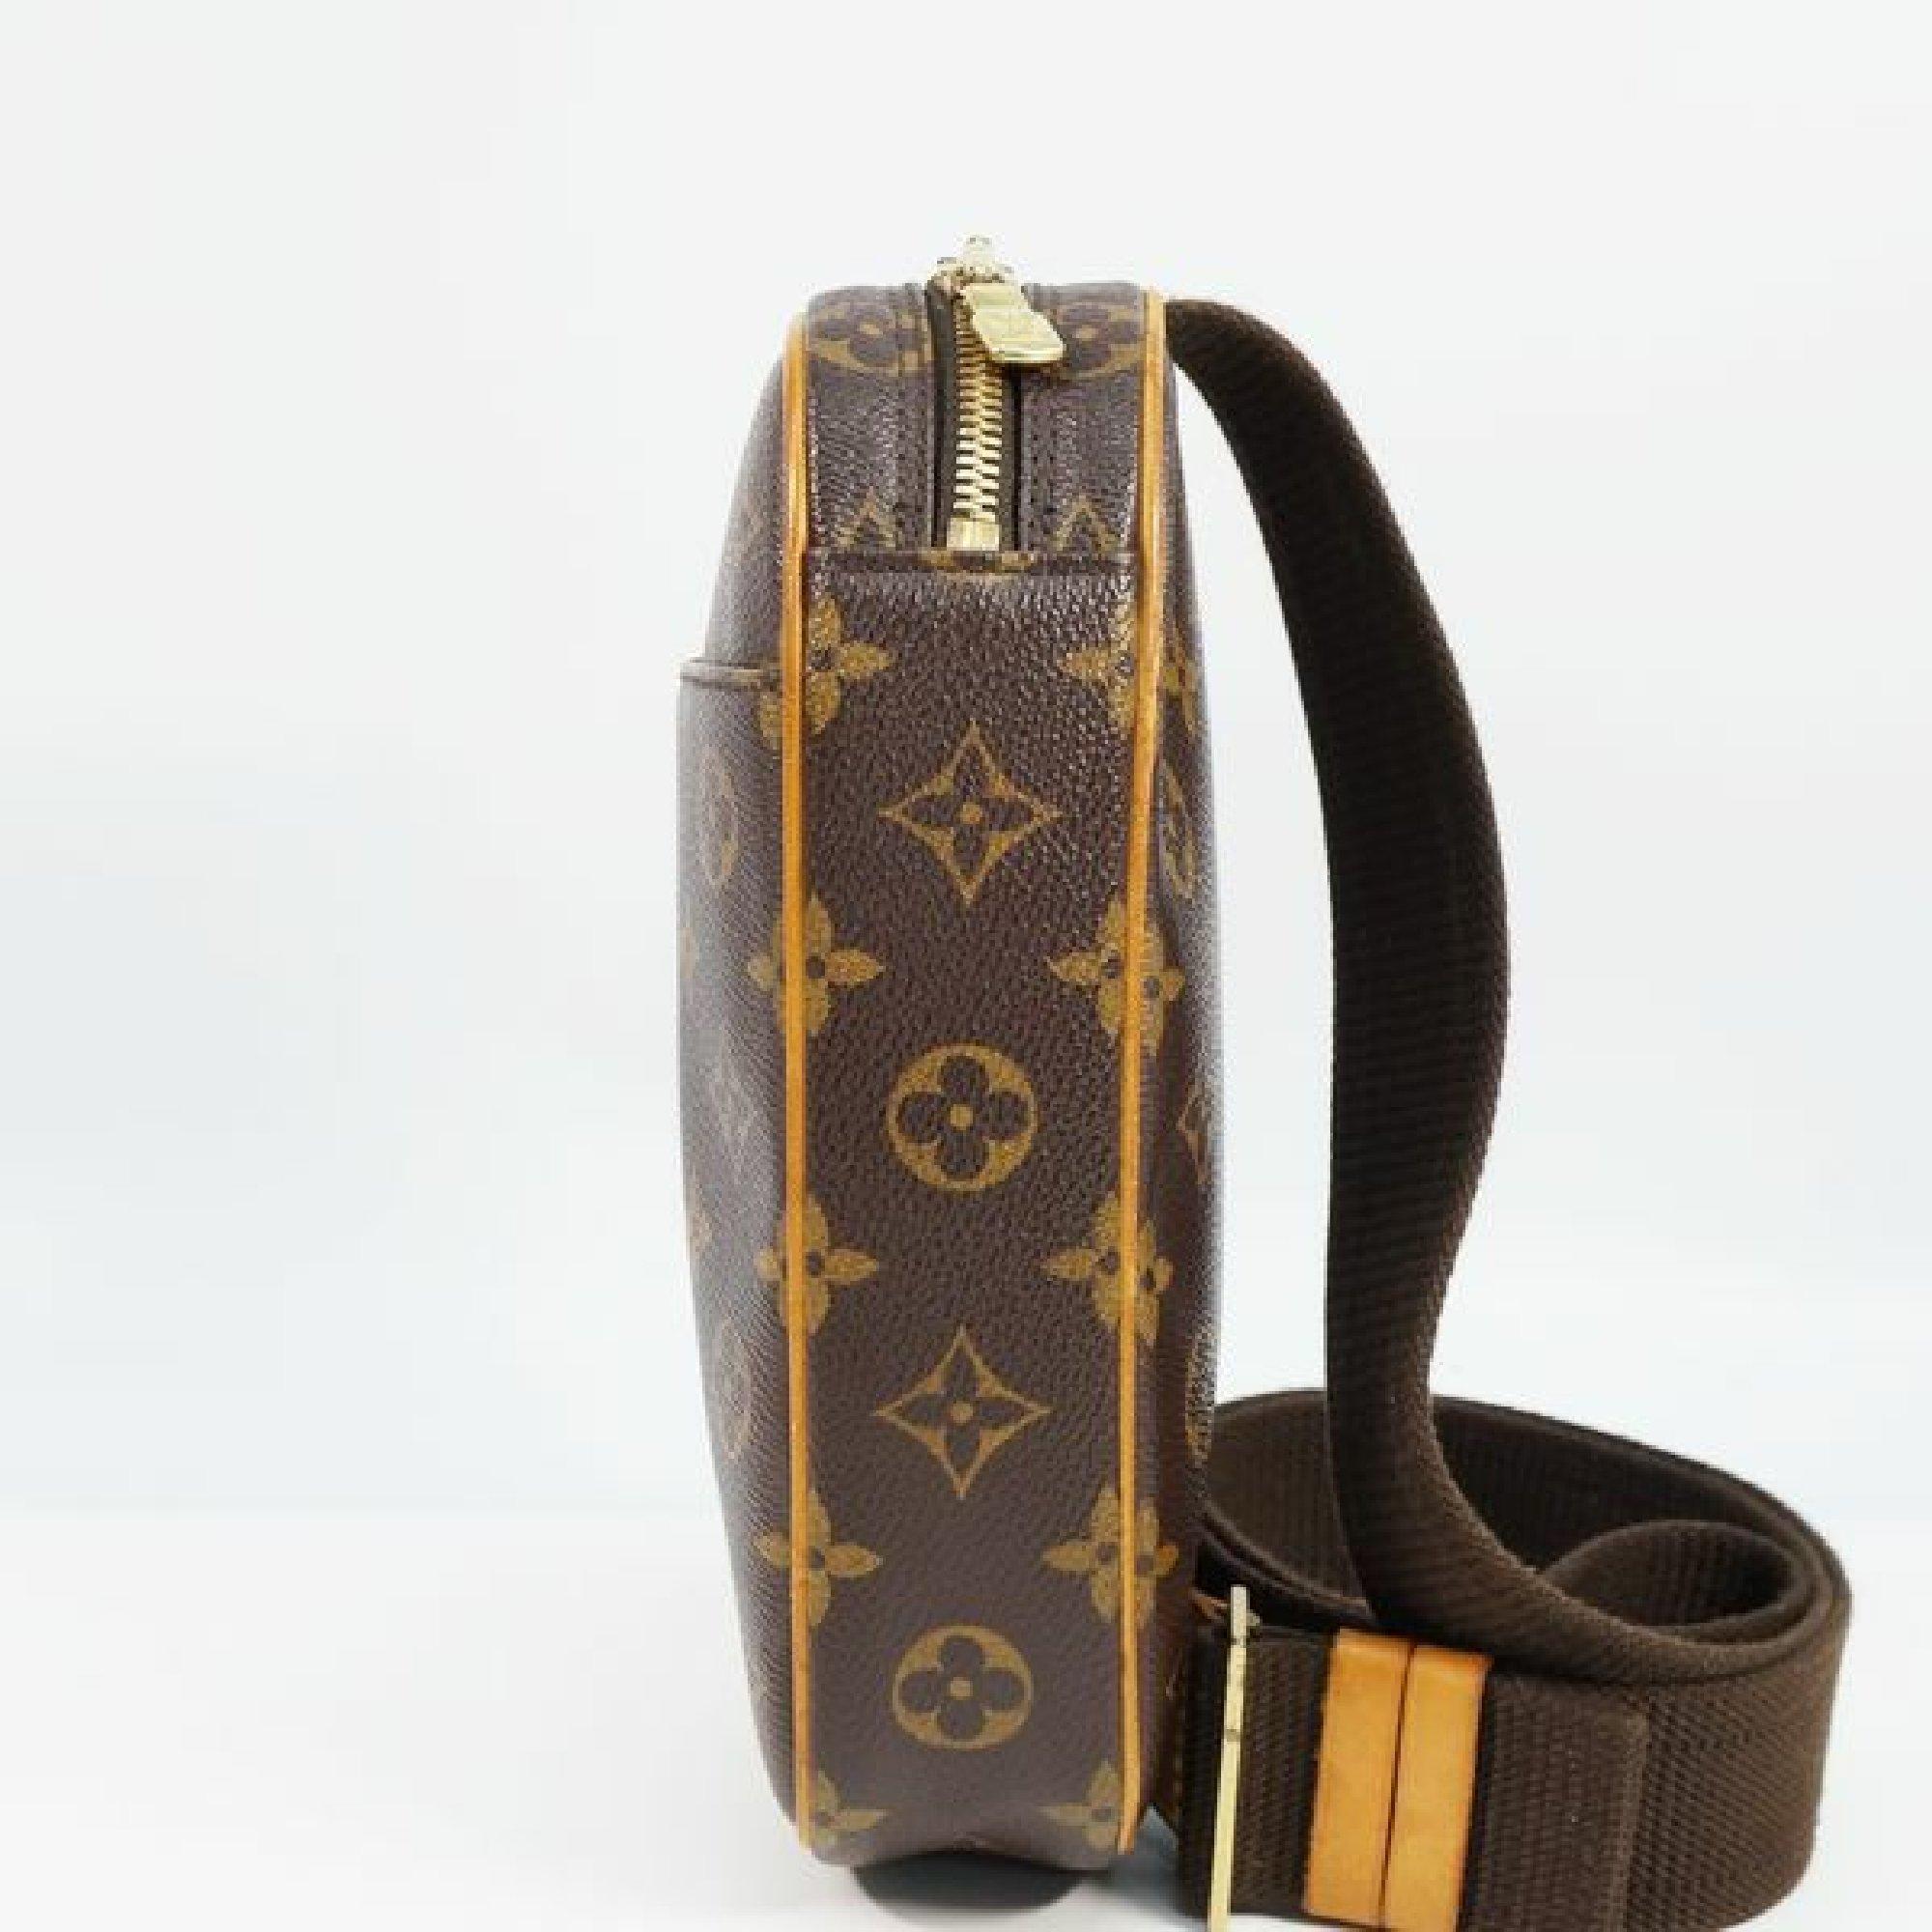 An authentic LOUIS VUITTON Pochette Gange Waist bag Mens body bag M51870 The outside material is Monogram canvas. The pattern is Pochette Gange  Waist bag. This item is Contemporary. The year of manufacture would be 2004.
Rank
AB signs of wear